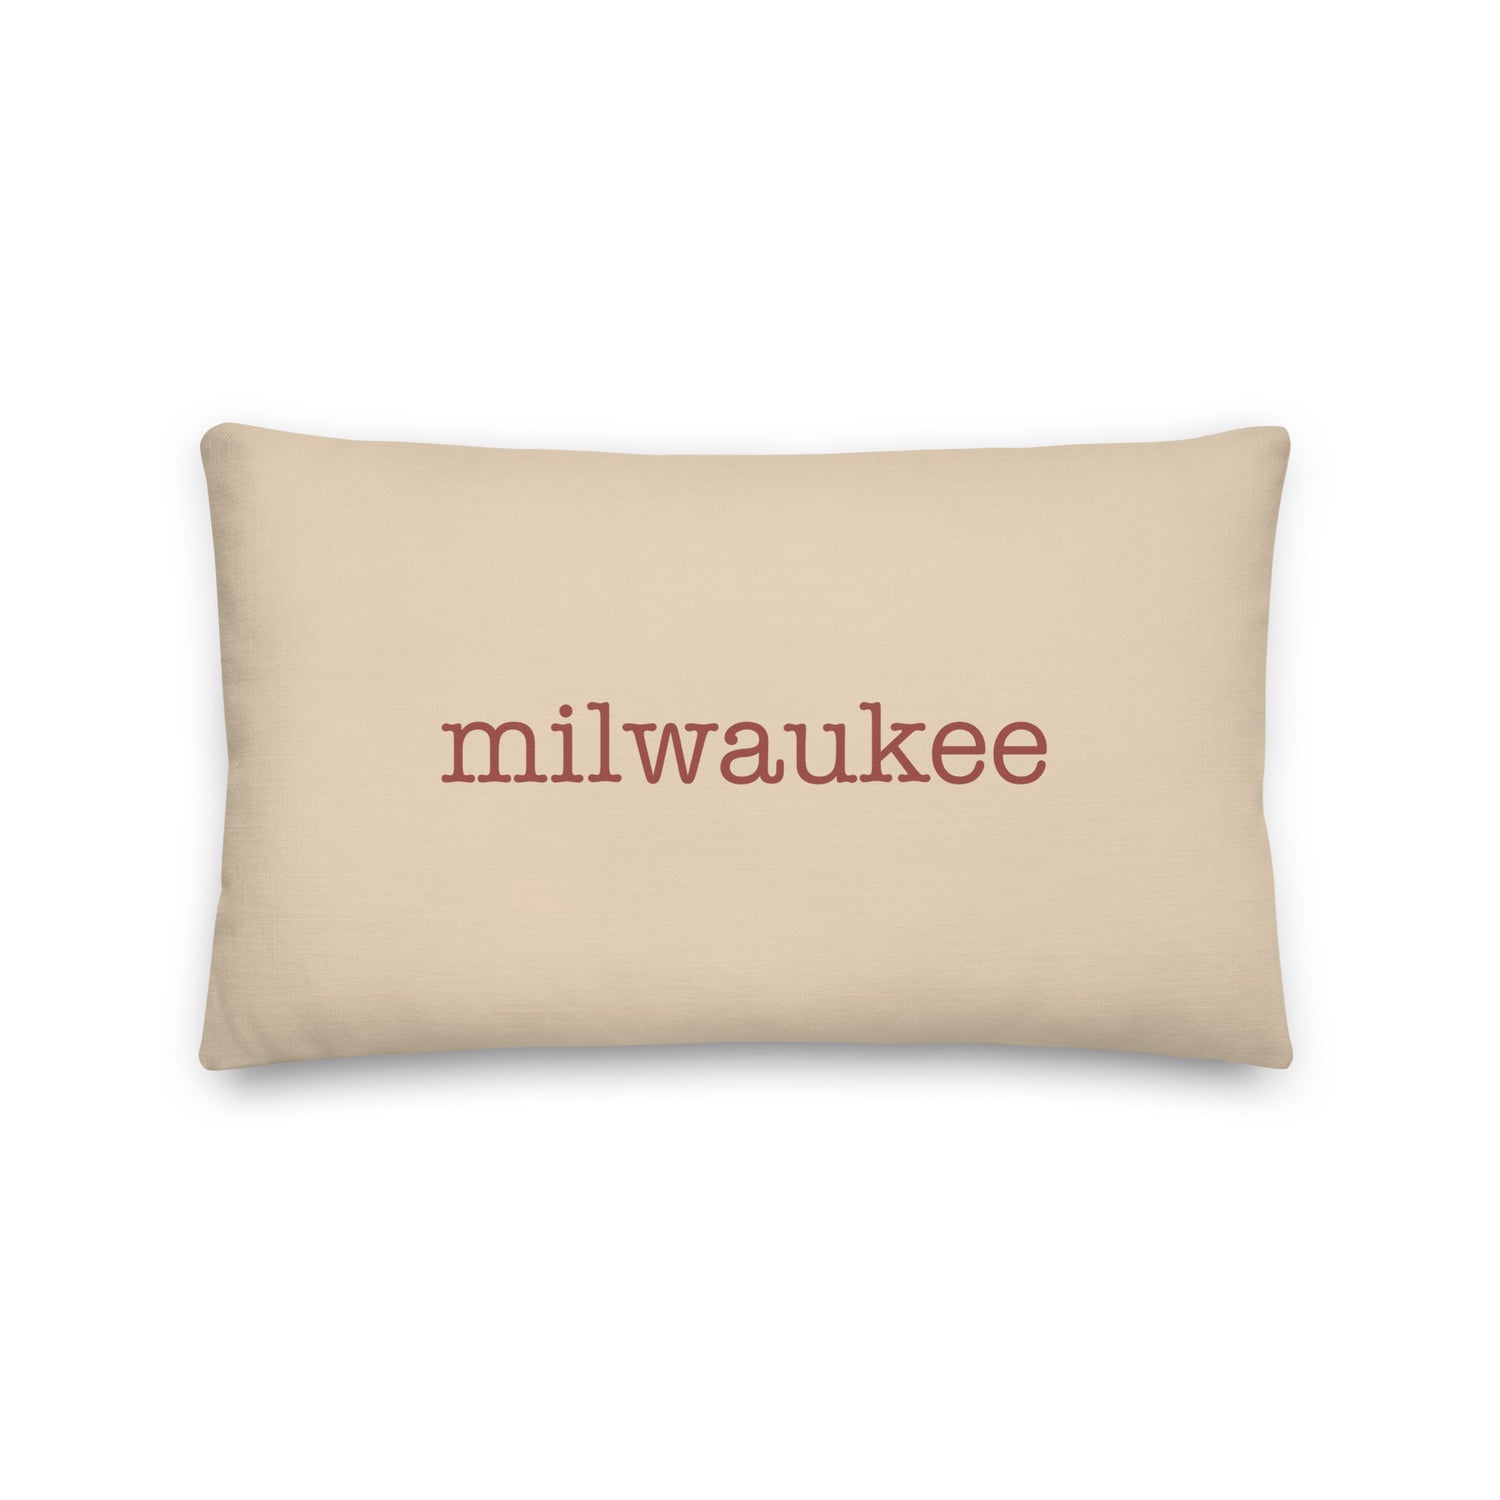 Milwaukee Wisconsin Pillows and Blankets • MKE Airport Code